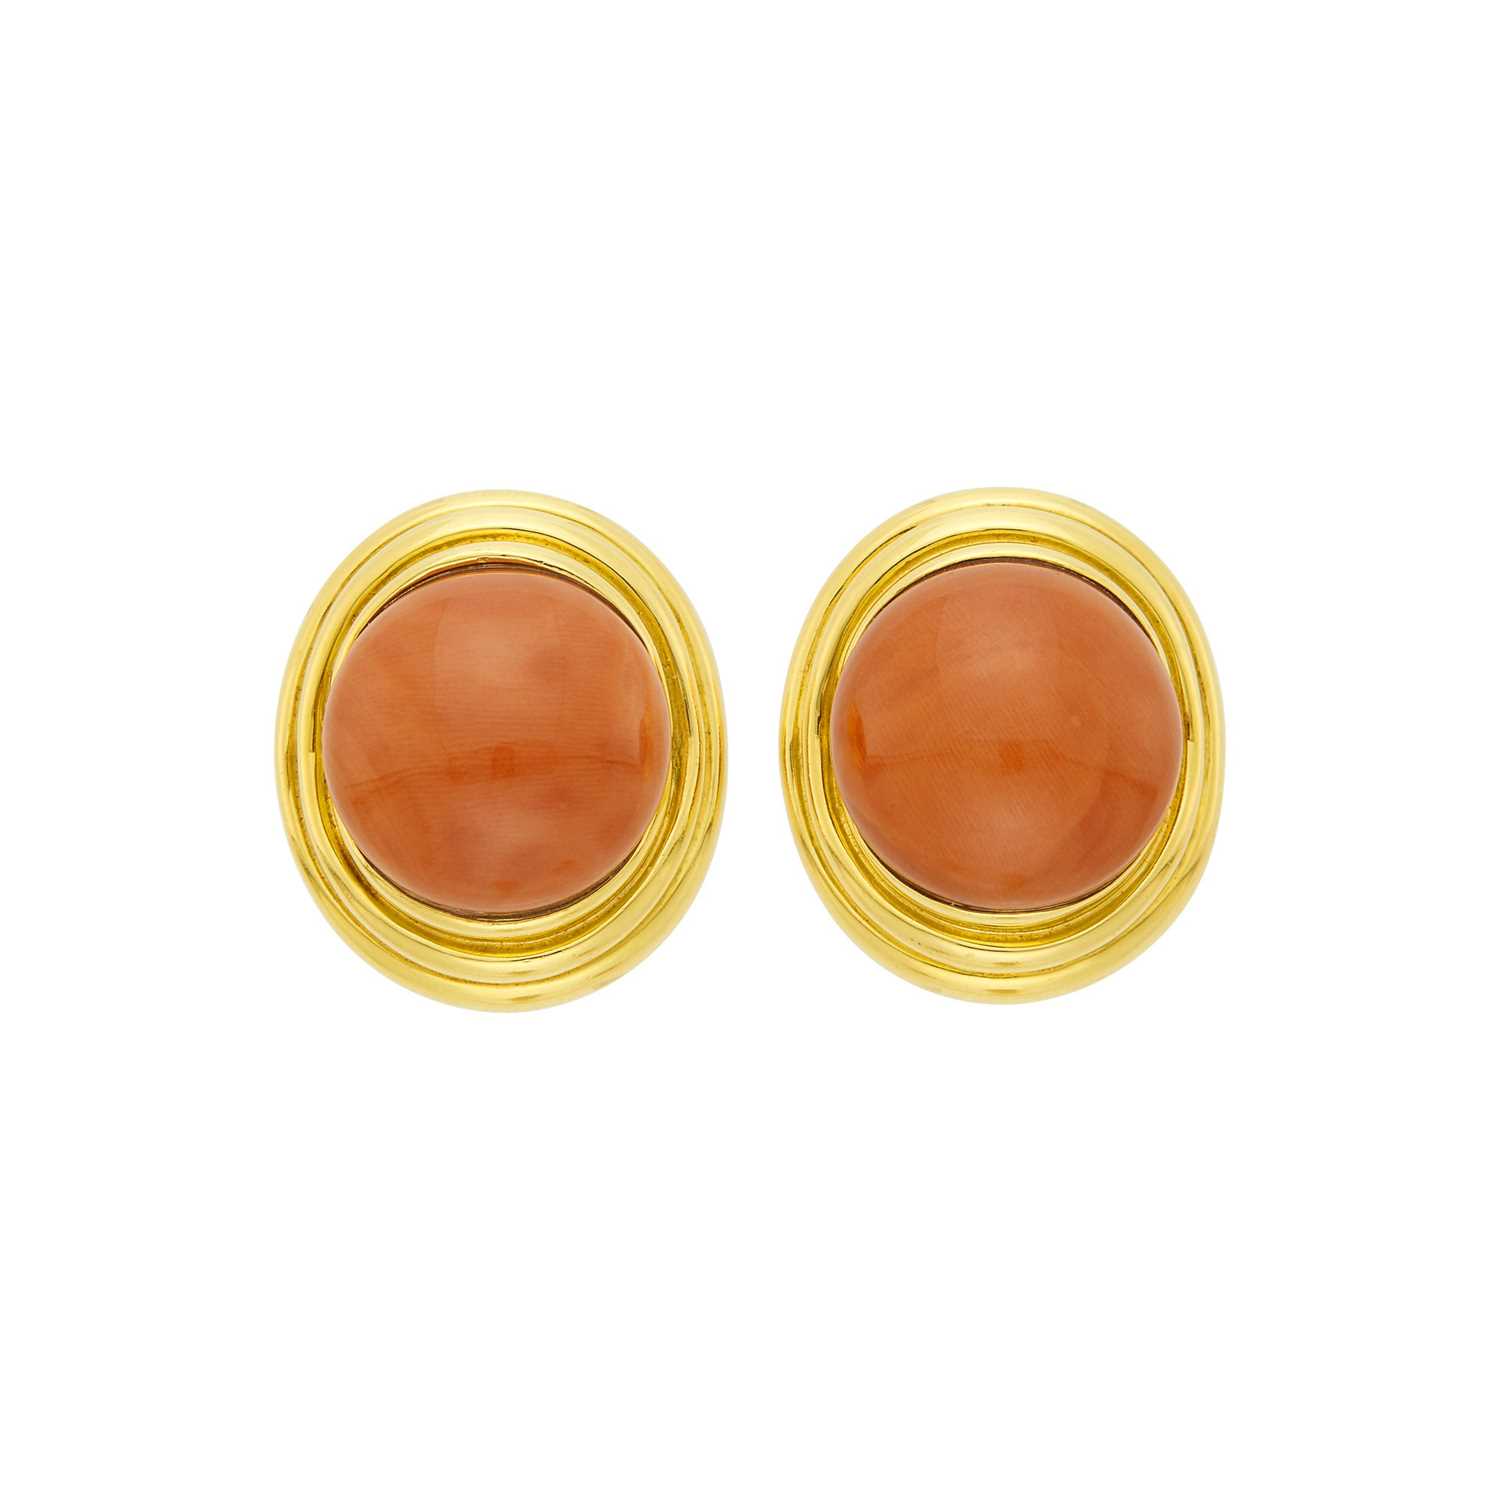 Lot 5 - Andrew Clunn Pair of Gold and Coral Earclips